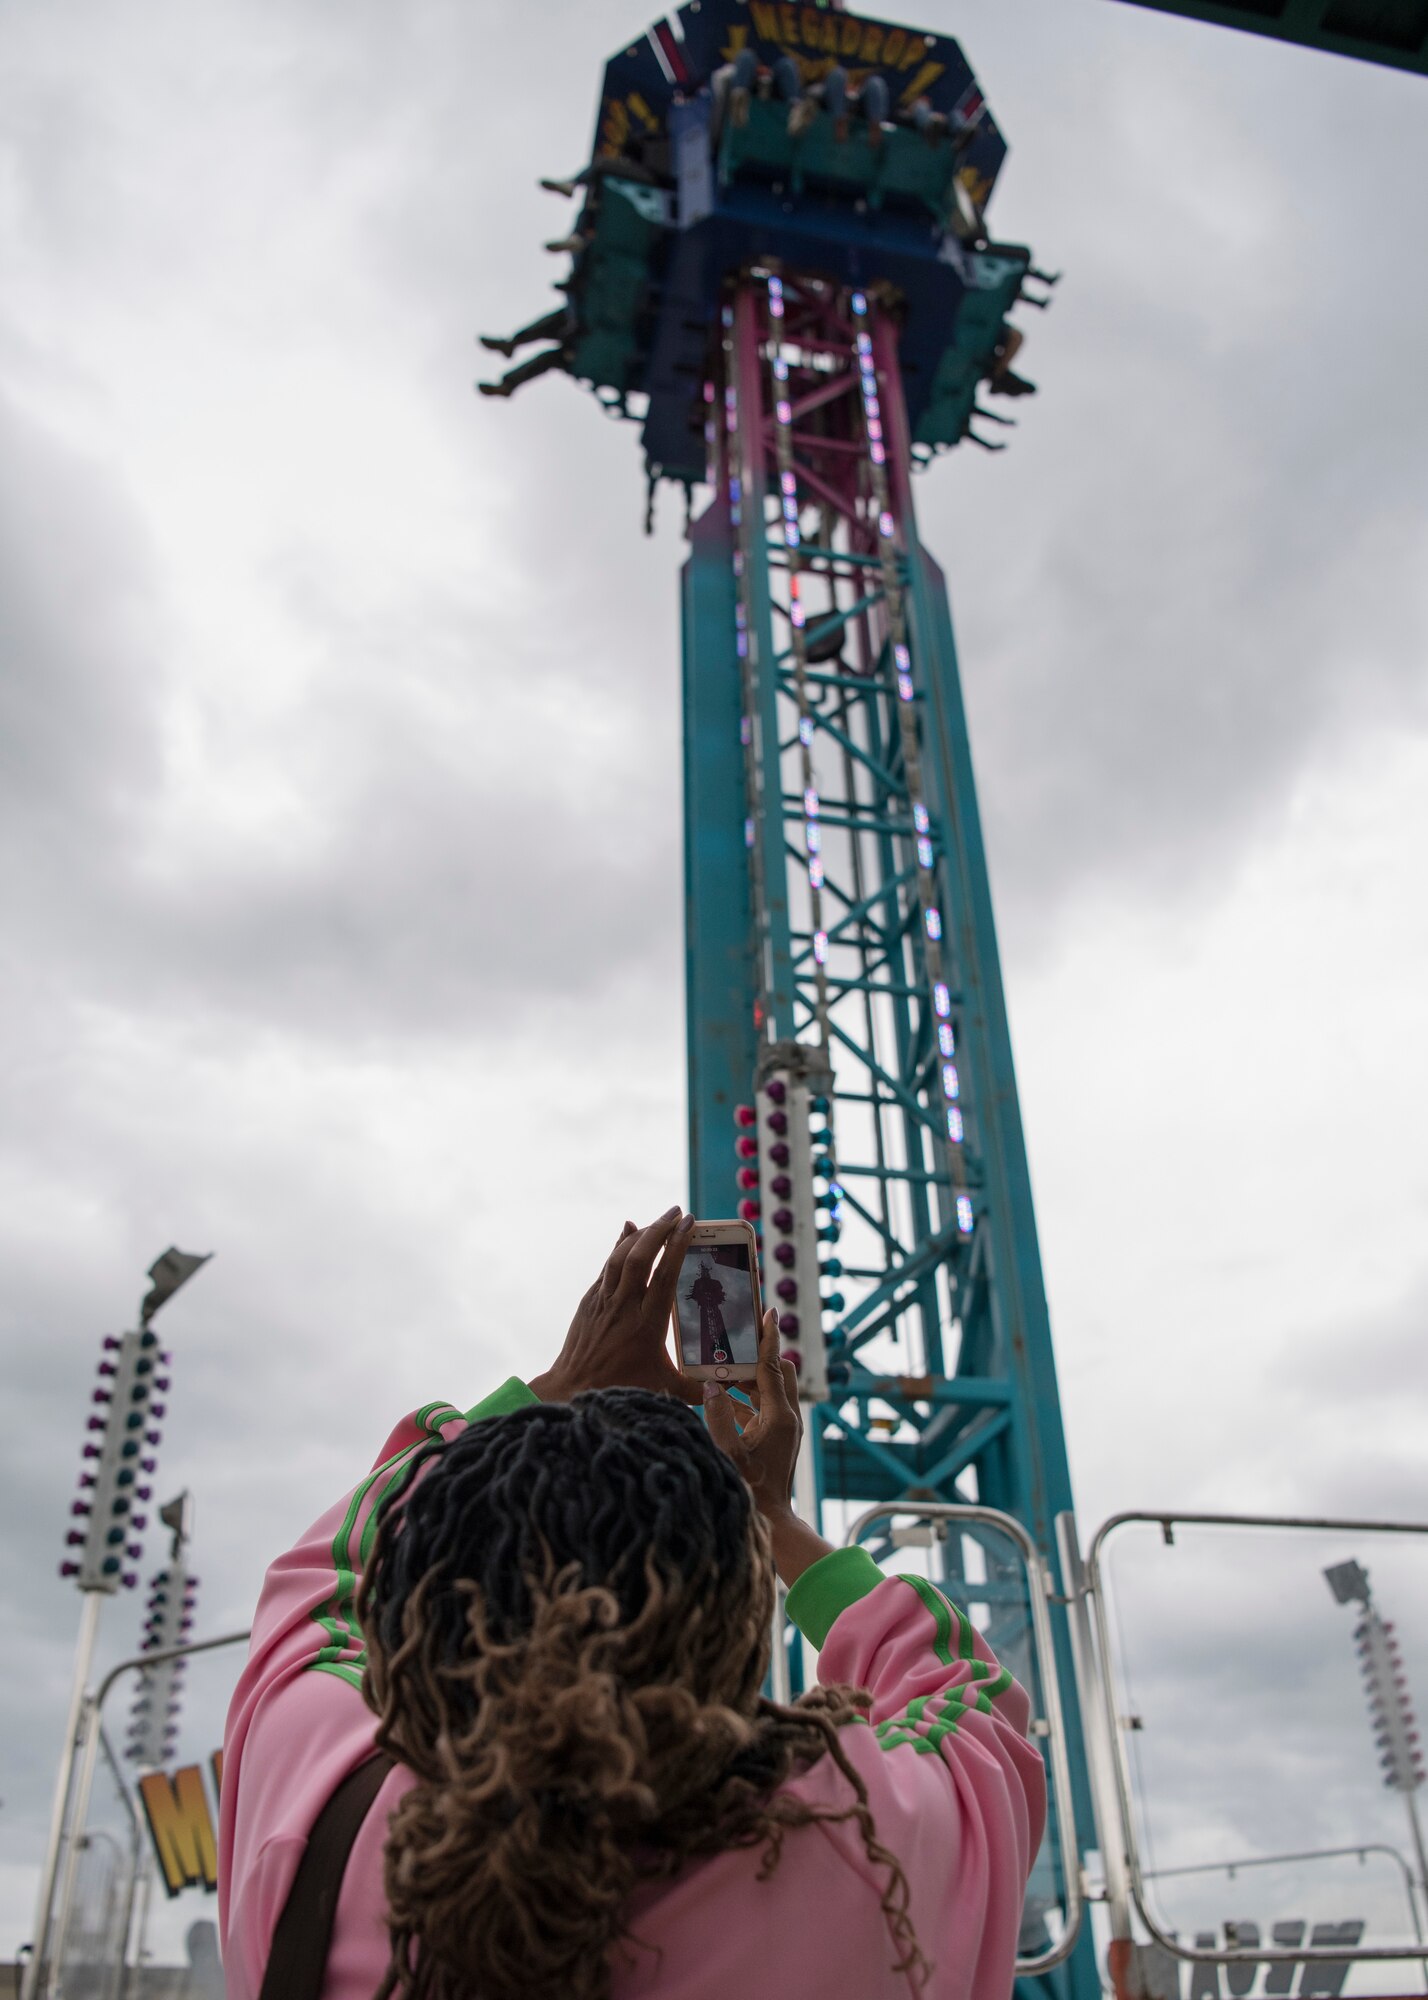 A spectator takes a picture of participants riding the “Mega Drop” during the 3rd annual Summer Fest hosted by the 673d Force Support Squadron at Joint Base Elmendorf-Richardson, Alaska, July 8, 2018. The event was open to anyone with base access and offered free activities such as carnival rides, a petting zoo, face painting, a bungee trampoline, and carnival games.